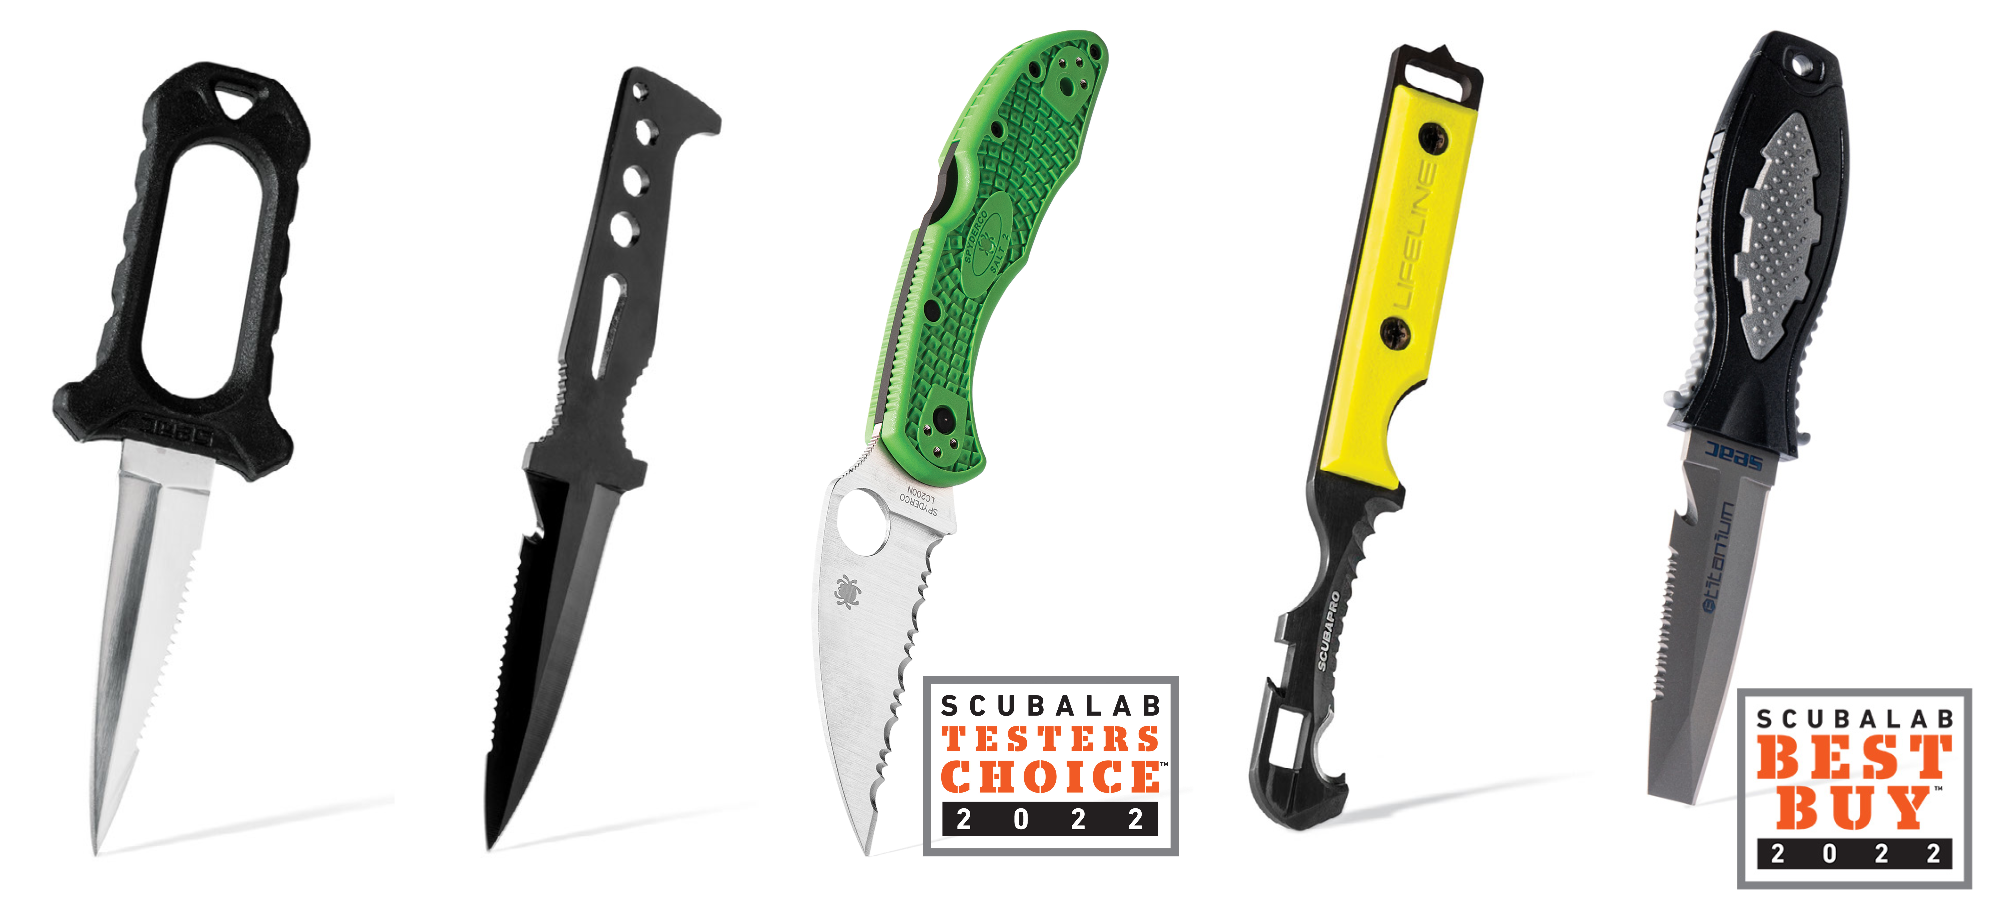 16 Dive Knives and Cutting Tools Reviewed by ScubaLab